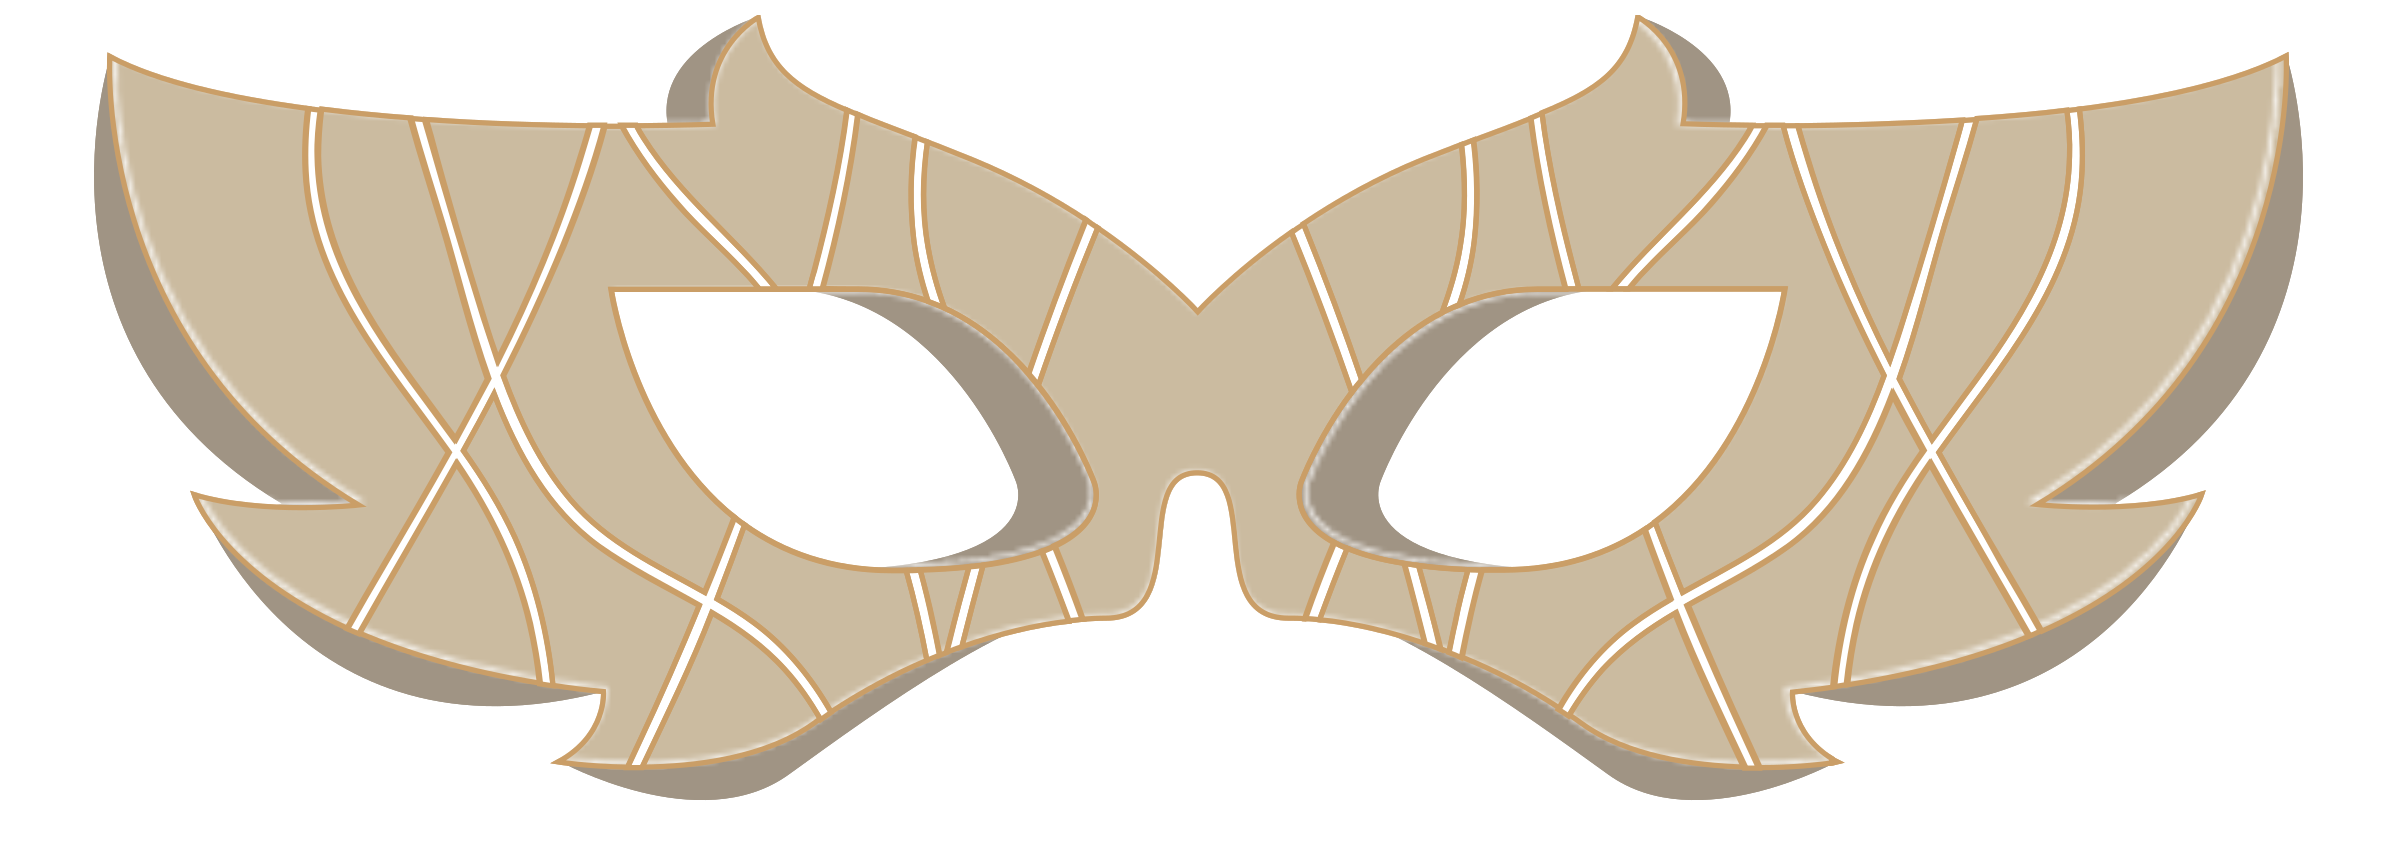 Free Maschera Png With Transparent Background